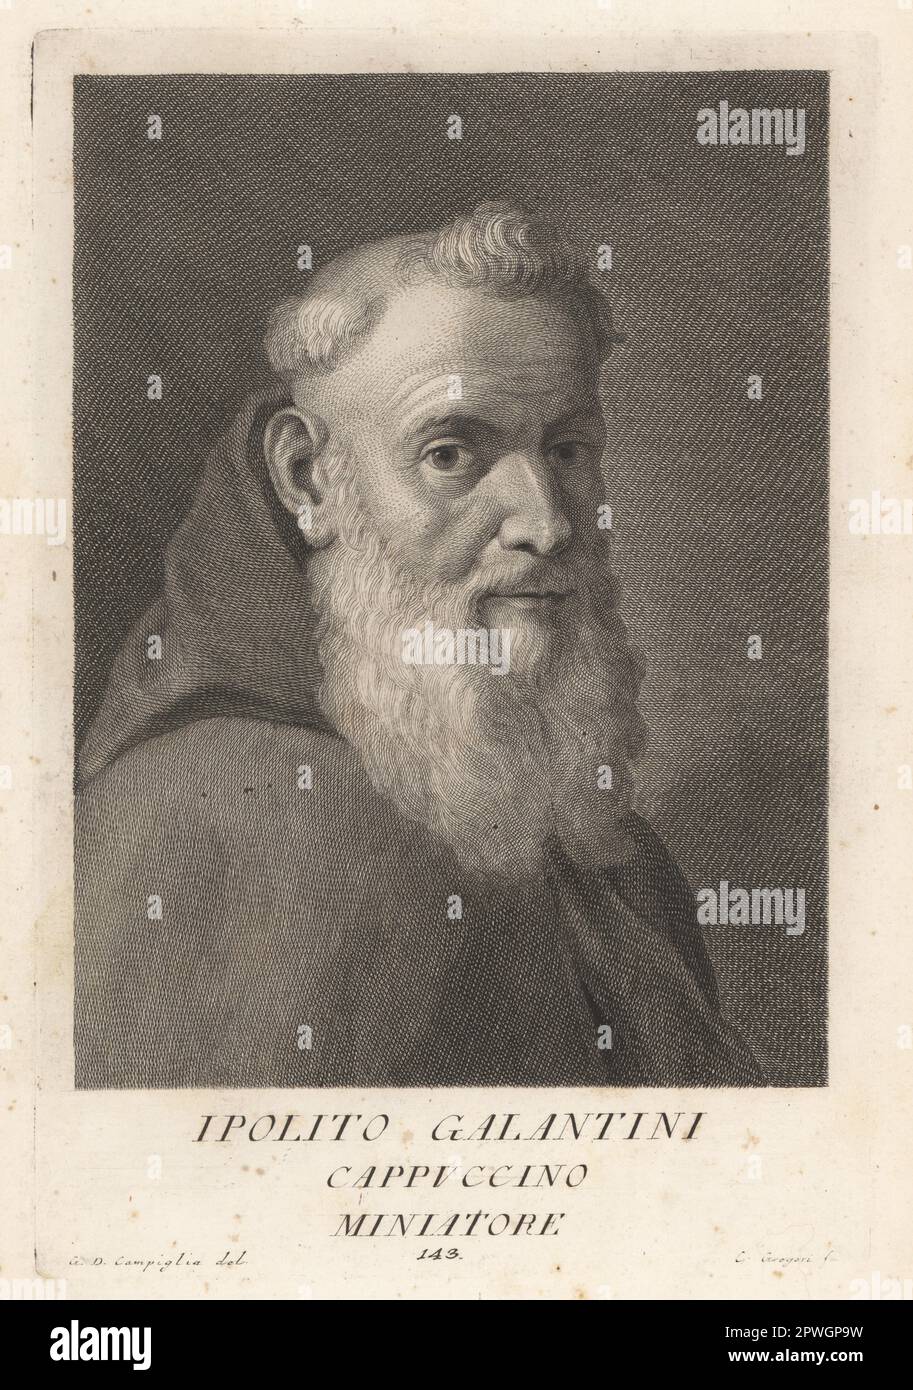 Ippolito Galantini, called II Cappucino or II Prete Genovese, Italian Baroque painter and miniaturist, 1627–1706. Born in Florence in 1627, studied under Padre Stefaneschi and became a Capuchin monk. Ipolito Galantini, Caupuccino, Miniatore. Copperplate engraving by Carlo Gregori after Giovanni Domenico Campiglia after a self portrait by the artist from Francesco Moucke's Museo Florentino (Museum Florentinum), Serie di Ritratti de Pittori (Series of Portraits of Painters) stamperia Mouckiana, Florence, 1752-62. Stock Photo